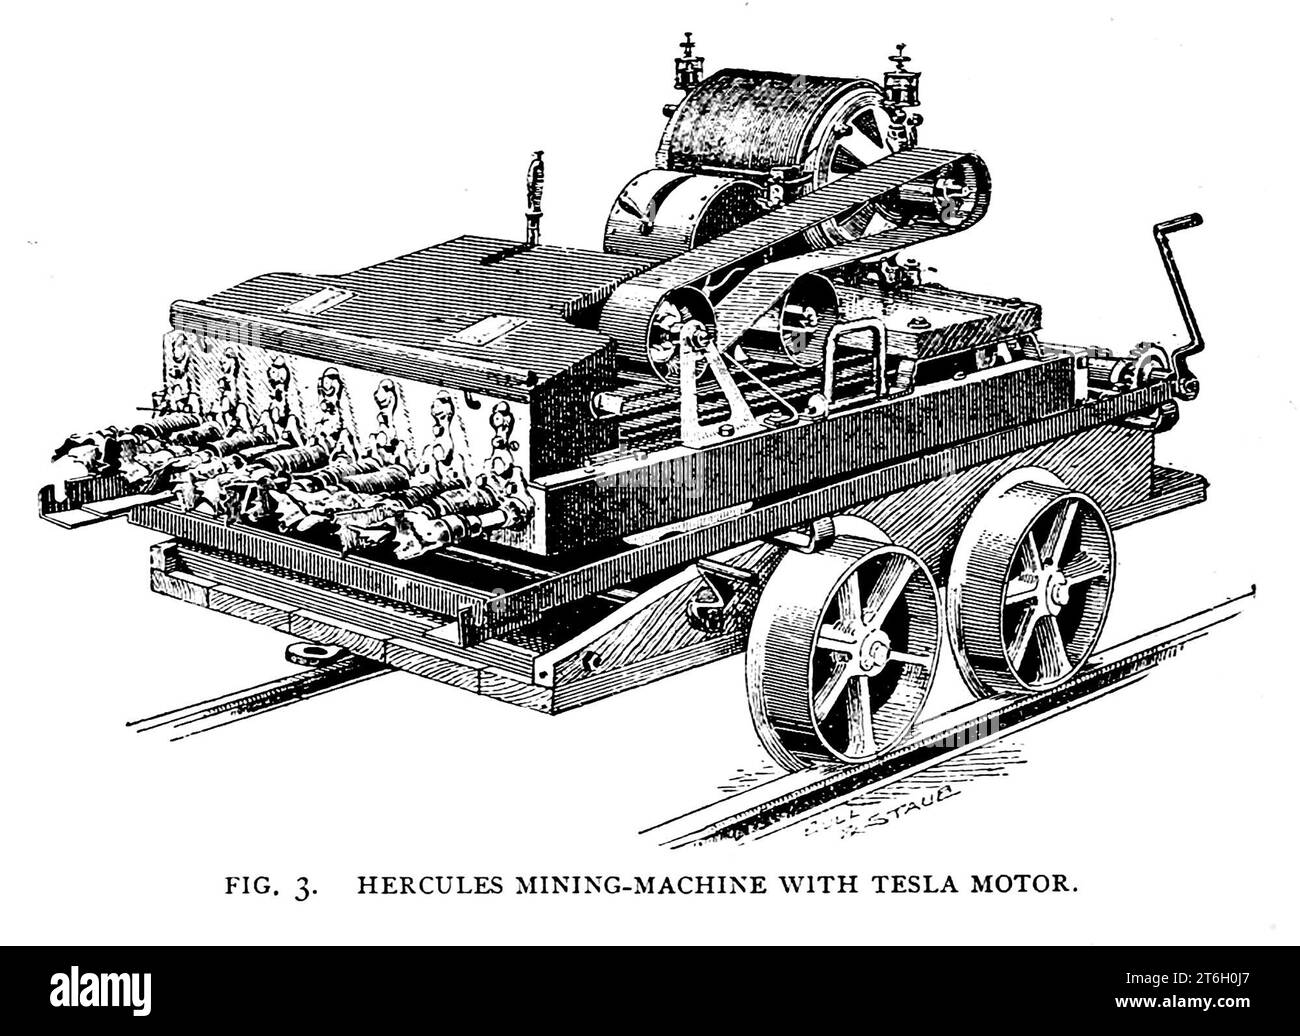 HERCULES MINING-MACHINE WITH TESLA MOTOR from the Article THE WONDERFUL EXPANSION IN THE USE OF ELECTRIC POWER. By Louis Bell  from The Engineering Magazine DEVOTED TO INDUSTRIAL PROGRESS Volume XII October 1896 to March 1897 The Engineering Magazine Co Stock Photo